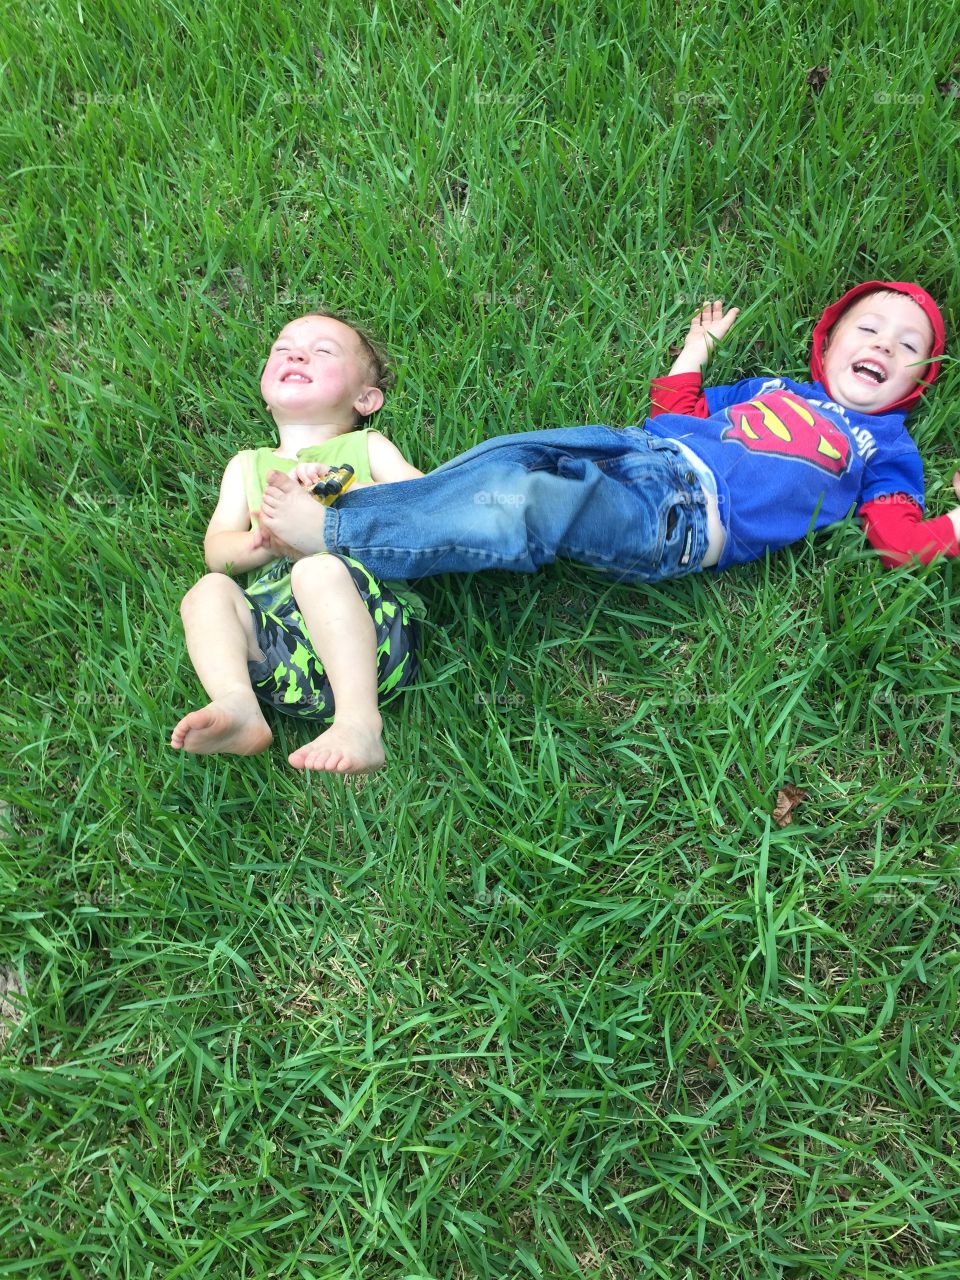 Boys playing in the grass in the front yard having lots of fun